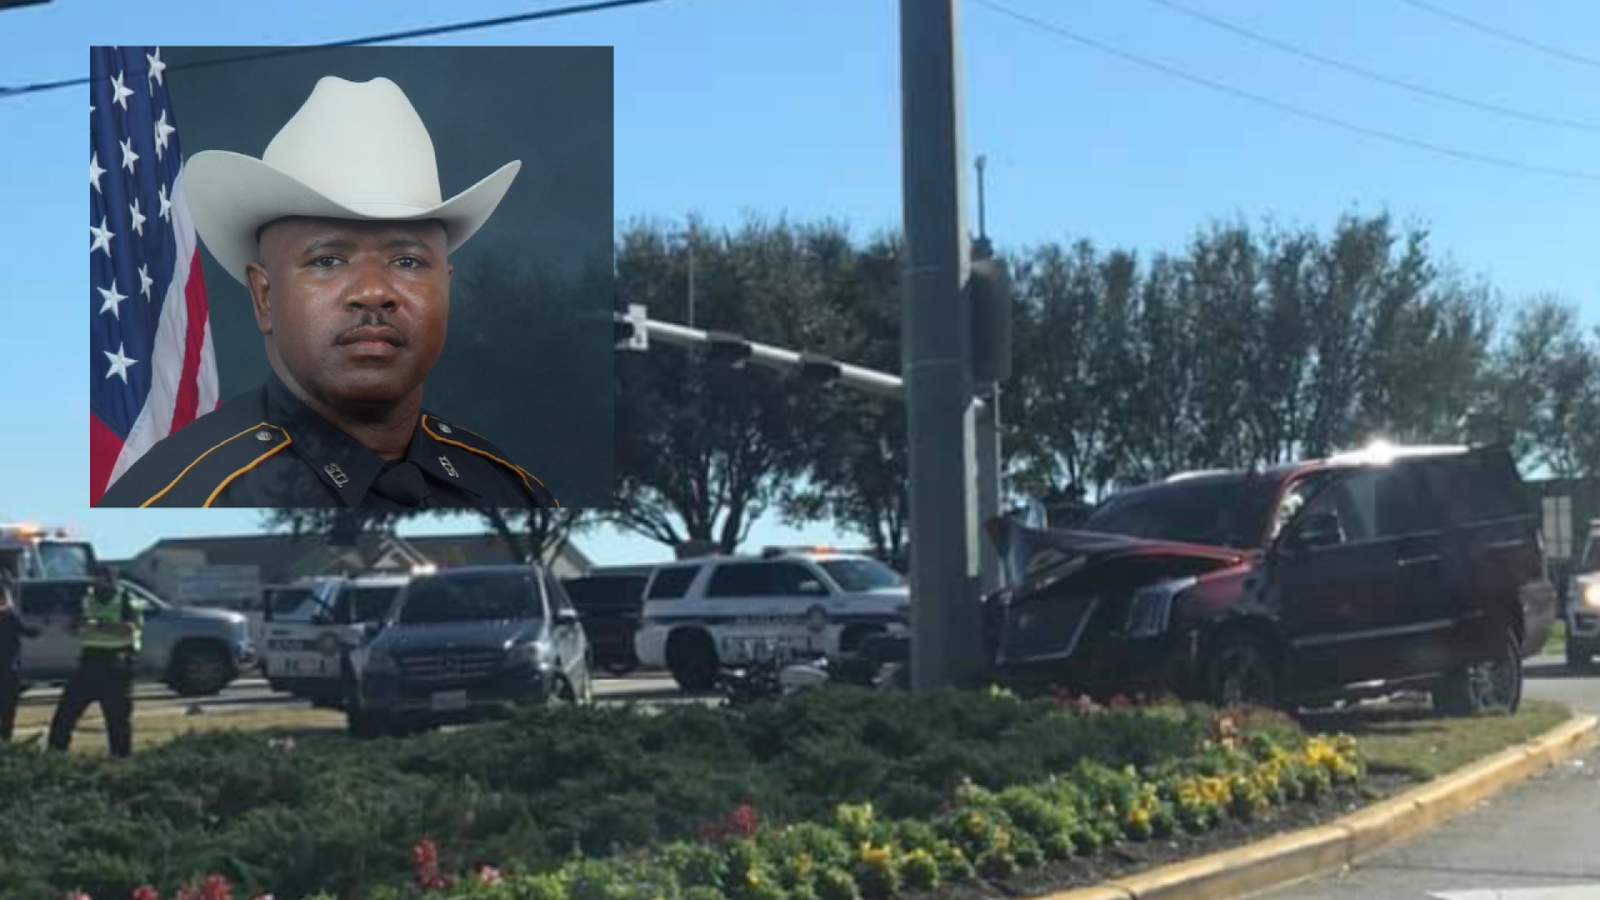 HSCO identifies Sgt.  Watson dies as deputy in service in motorcycle accident in Pearland